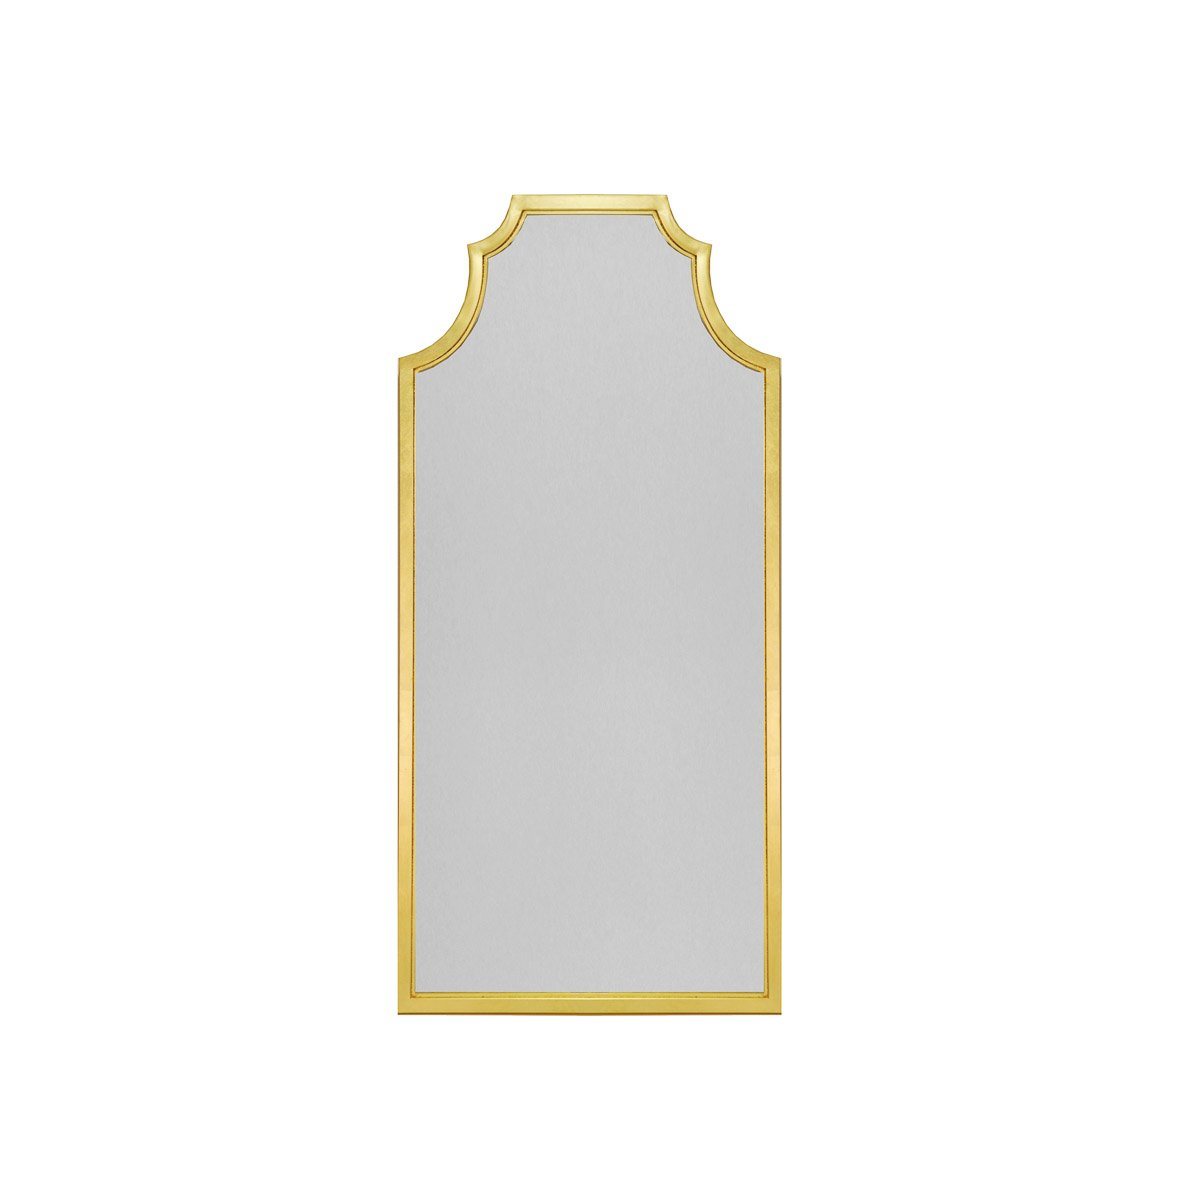 Emile Mirror Gold Leaf. Front view.